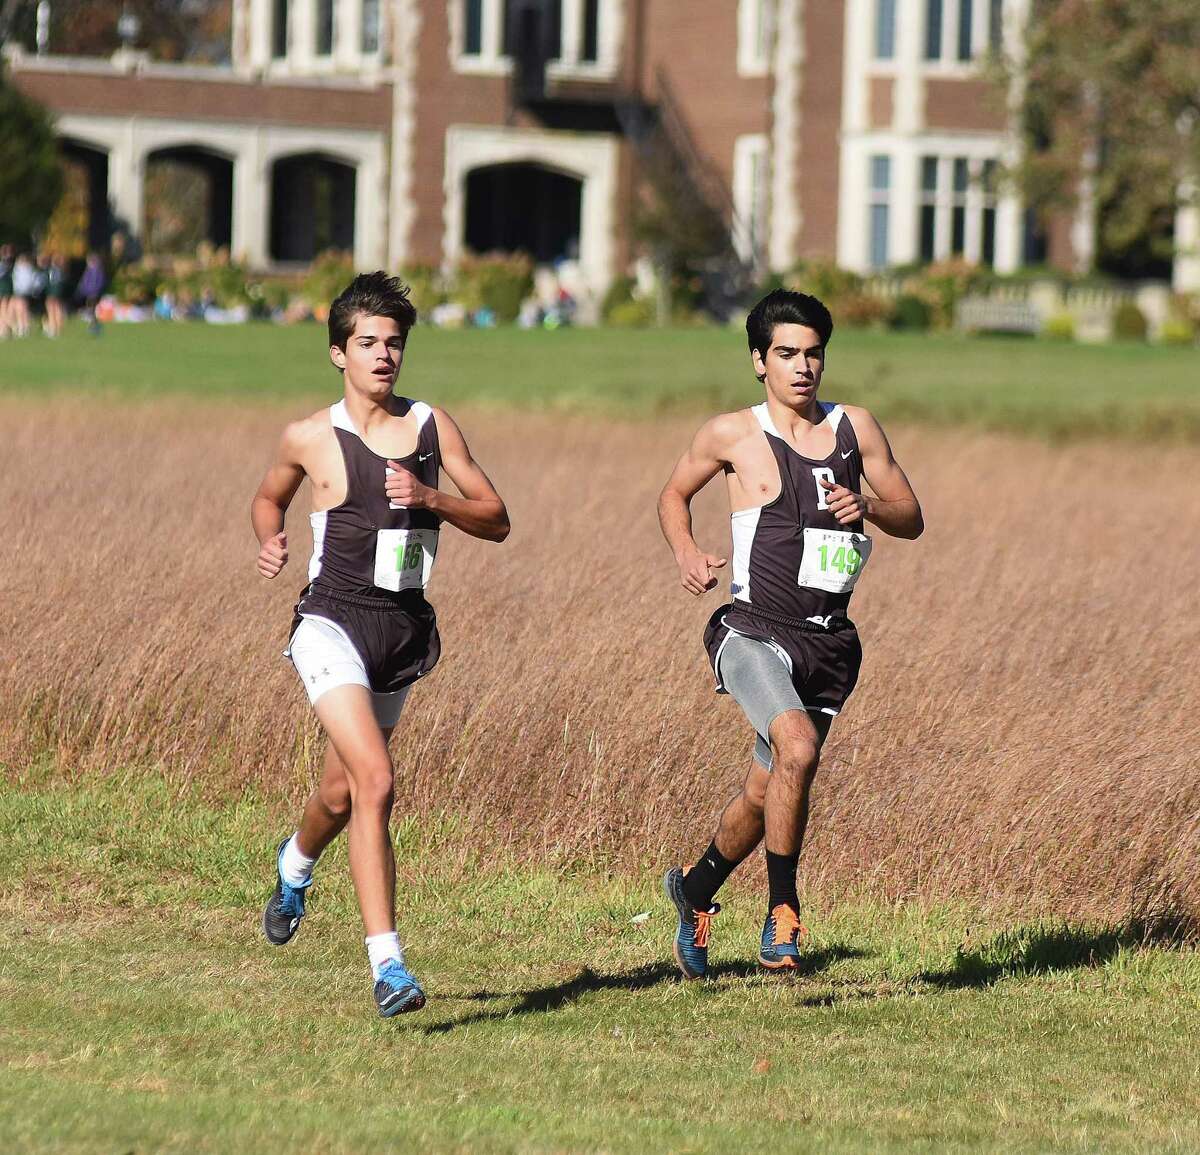 Brunswick runners Kyle Raker, left, and Andres Jasson race at Waveny Park in New Canaan on Tuesday during the FAA boys varsity cross country championship race. Jasson was among 3 Connecticut soccer players chosen to take part in NYCFC's preseason.